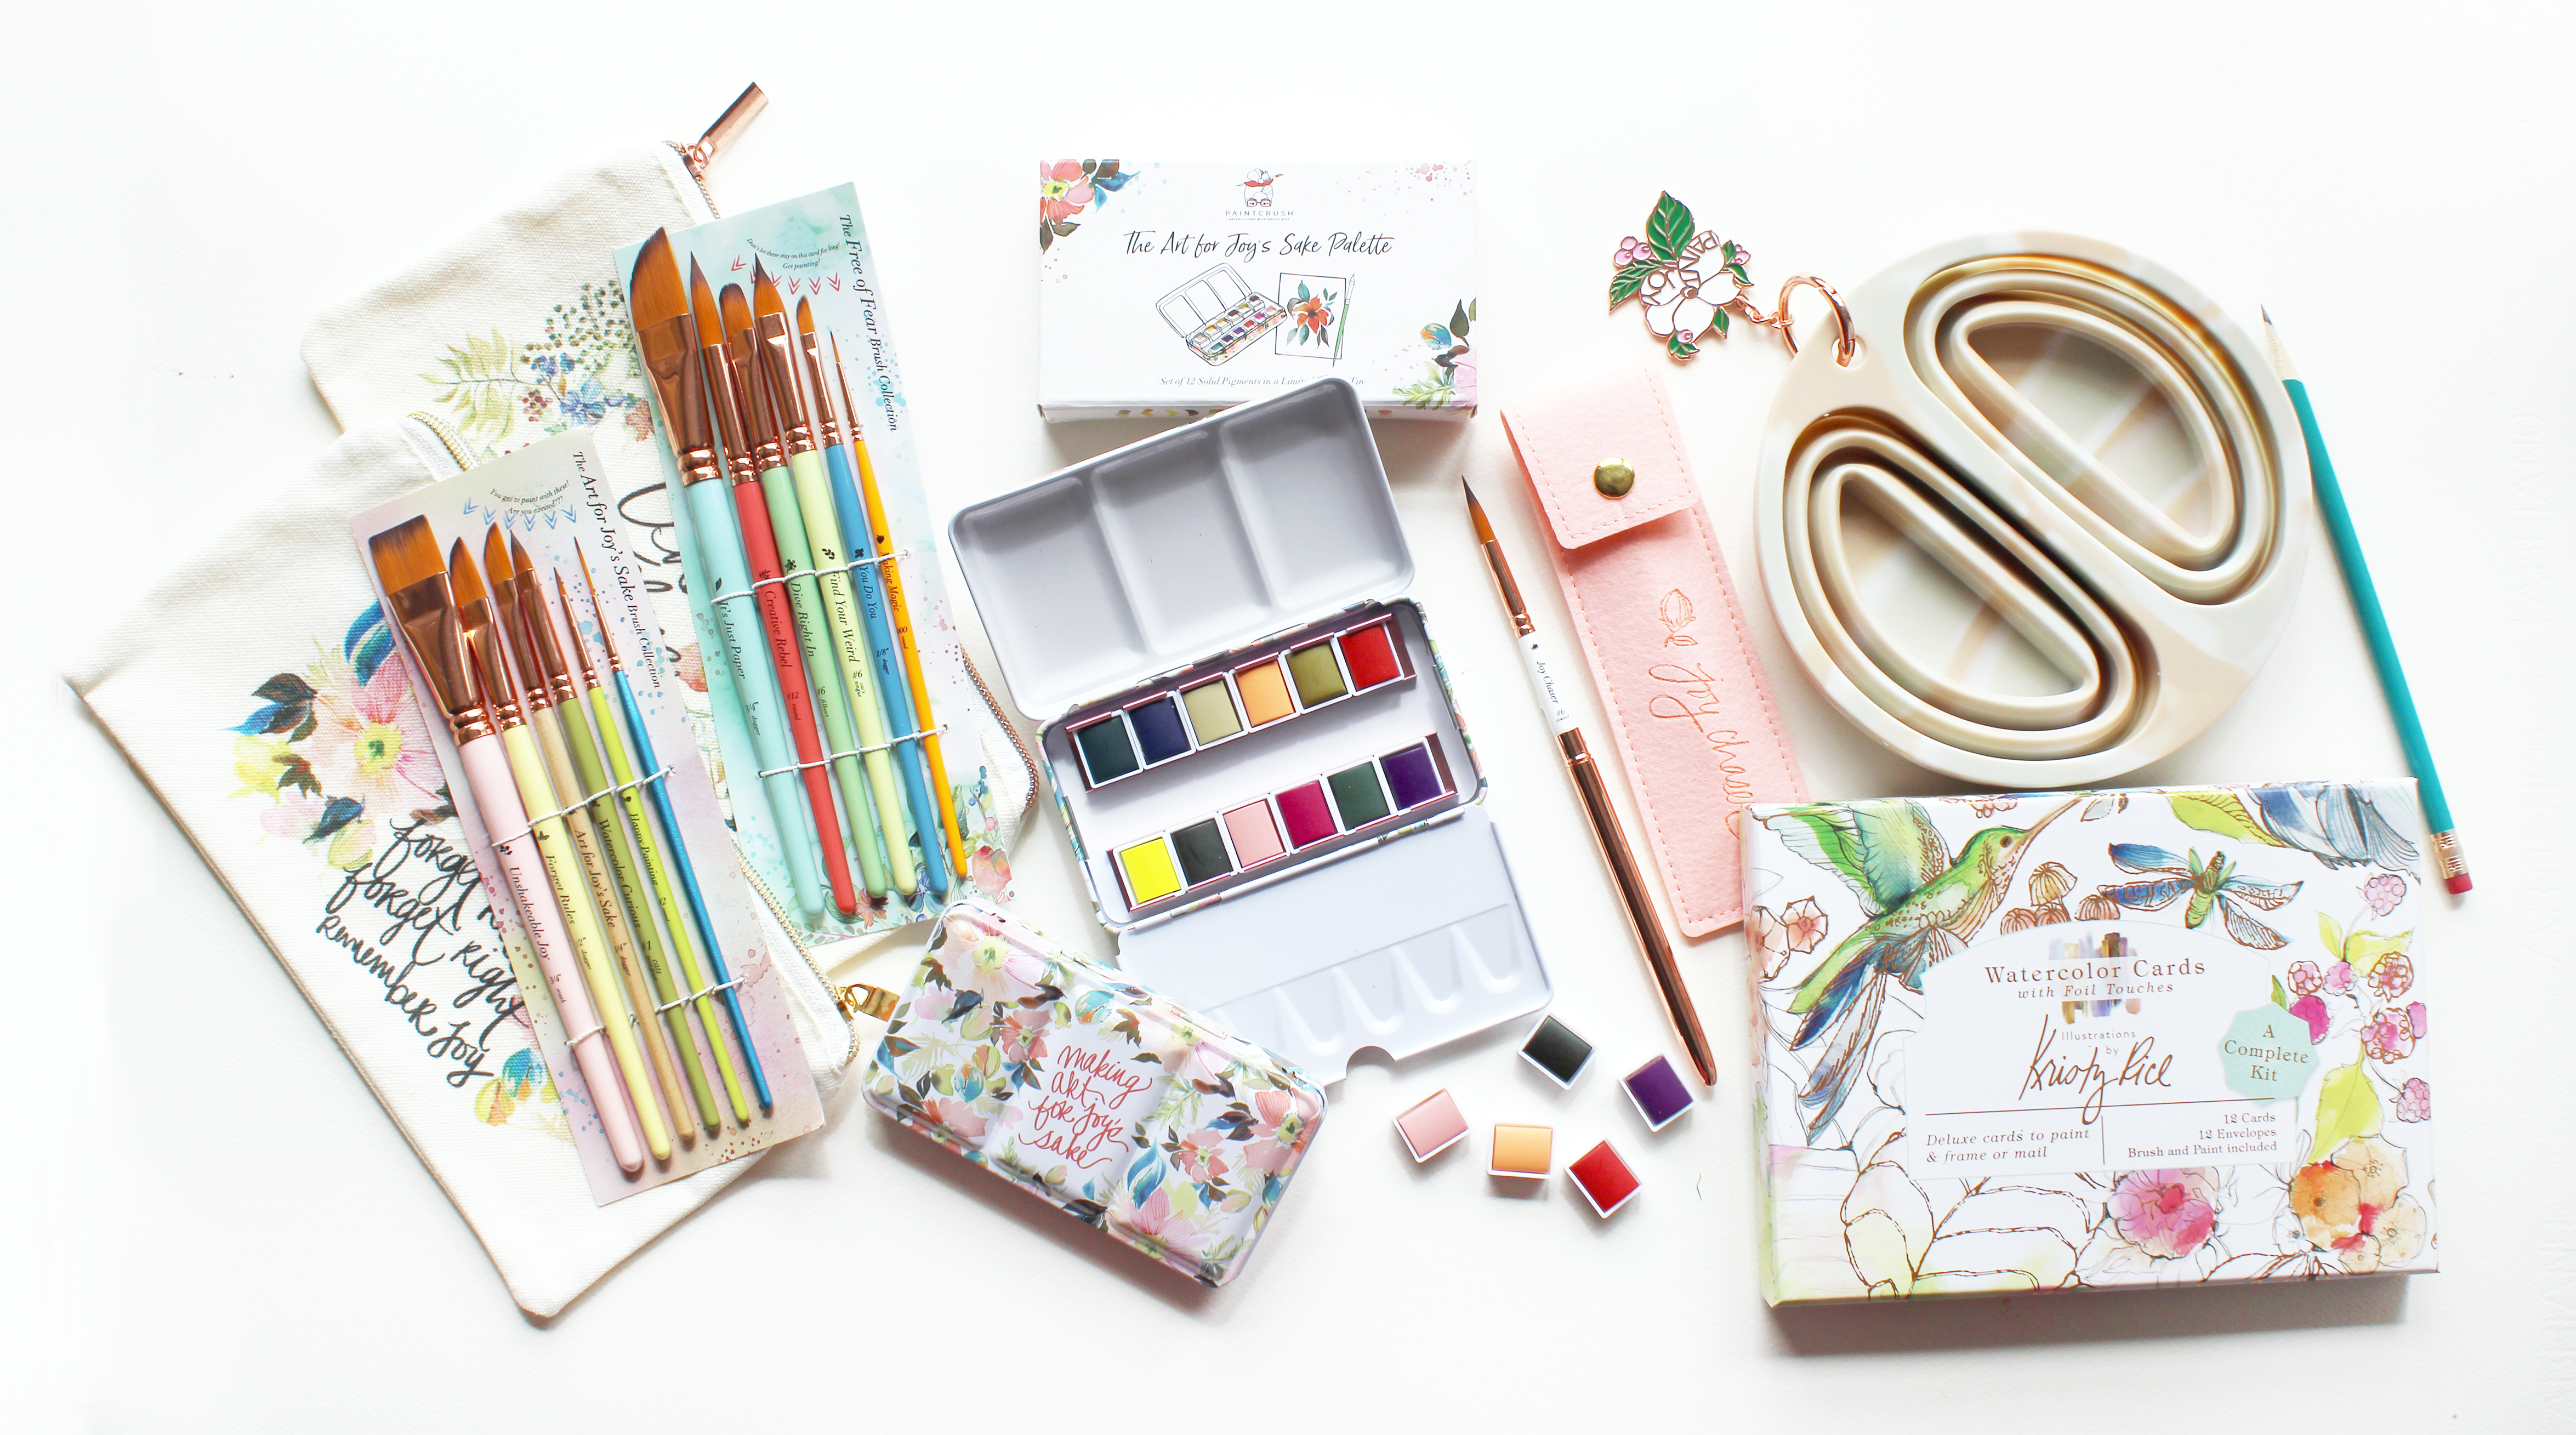 A Curiously Small DIY Sketch Kit